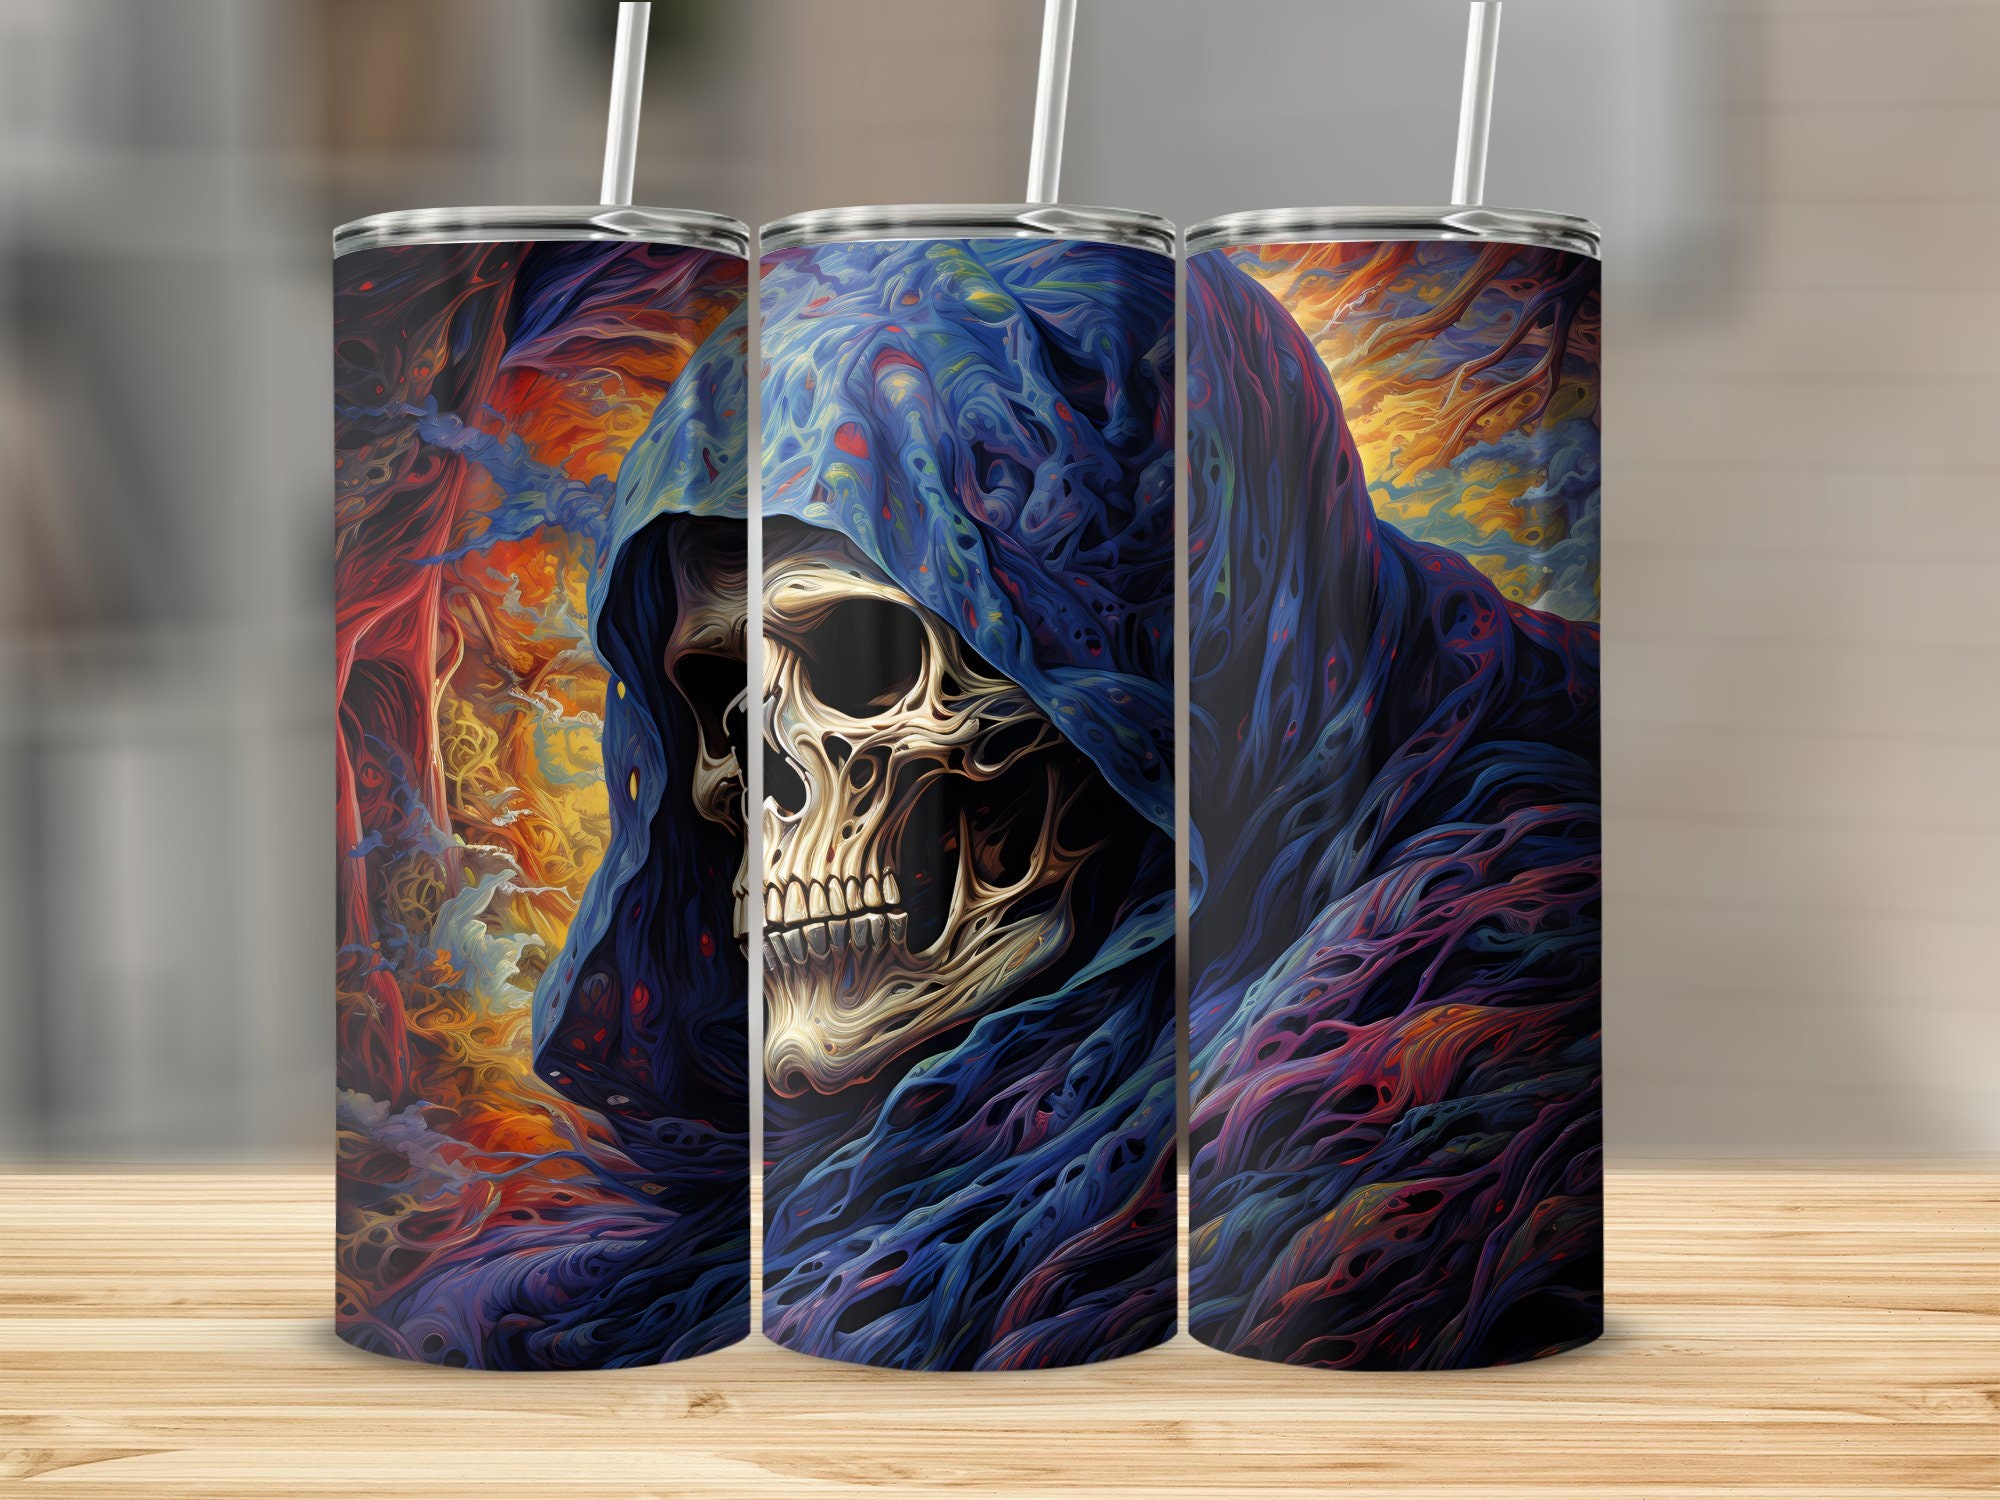 Grim Philly Hot/Cold Drink Tumbler - Lady Reaper Design